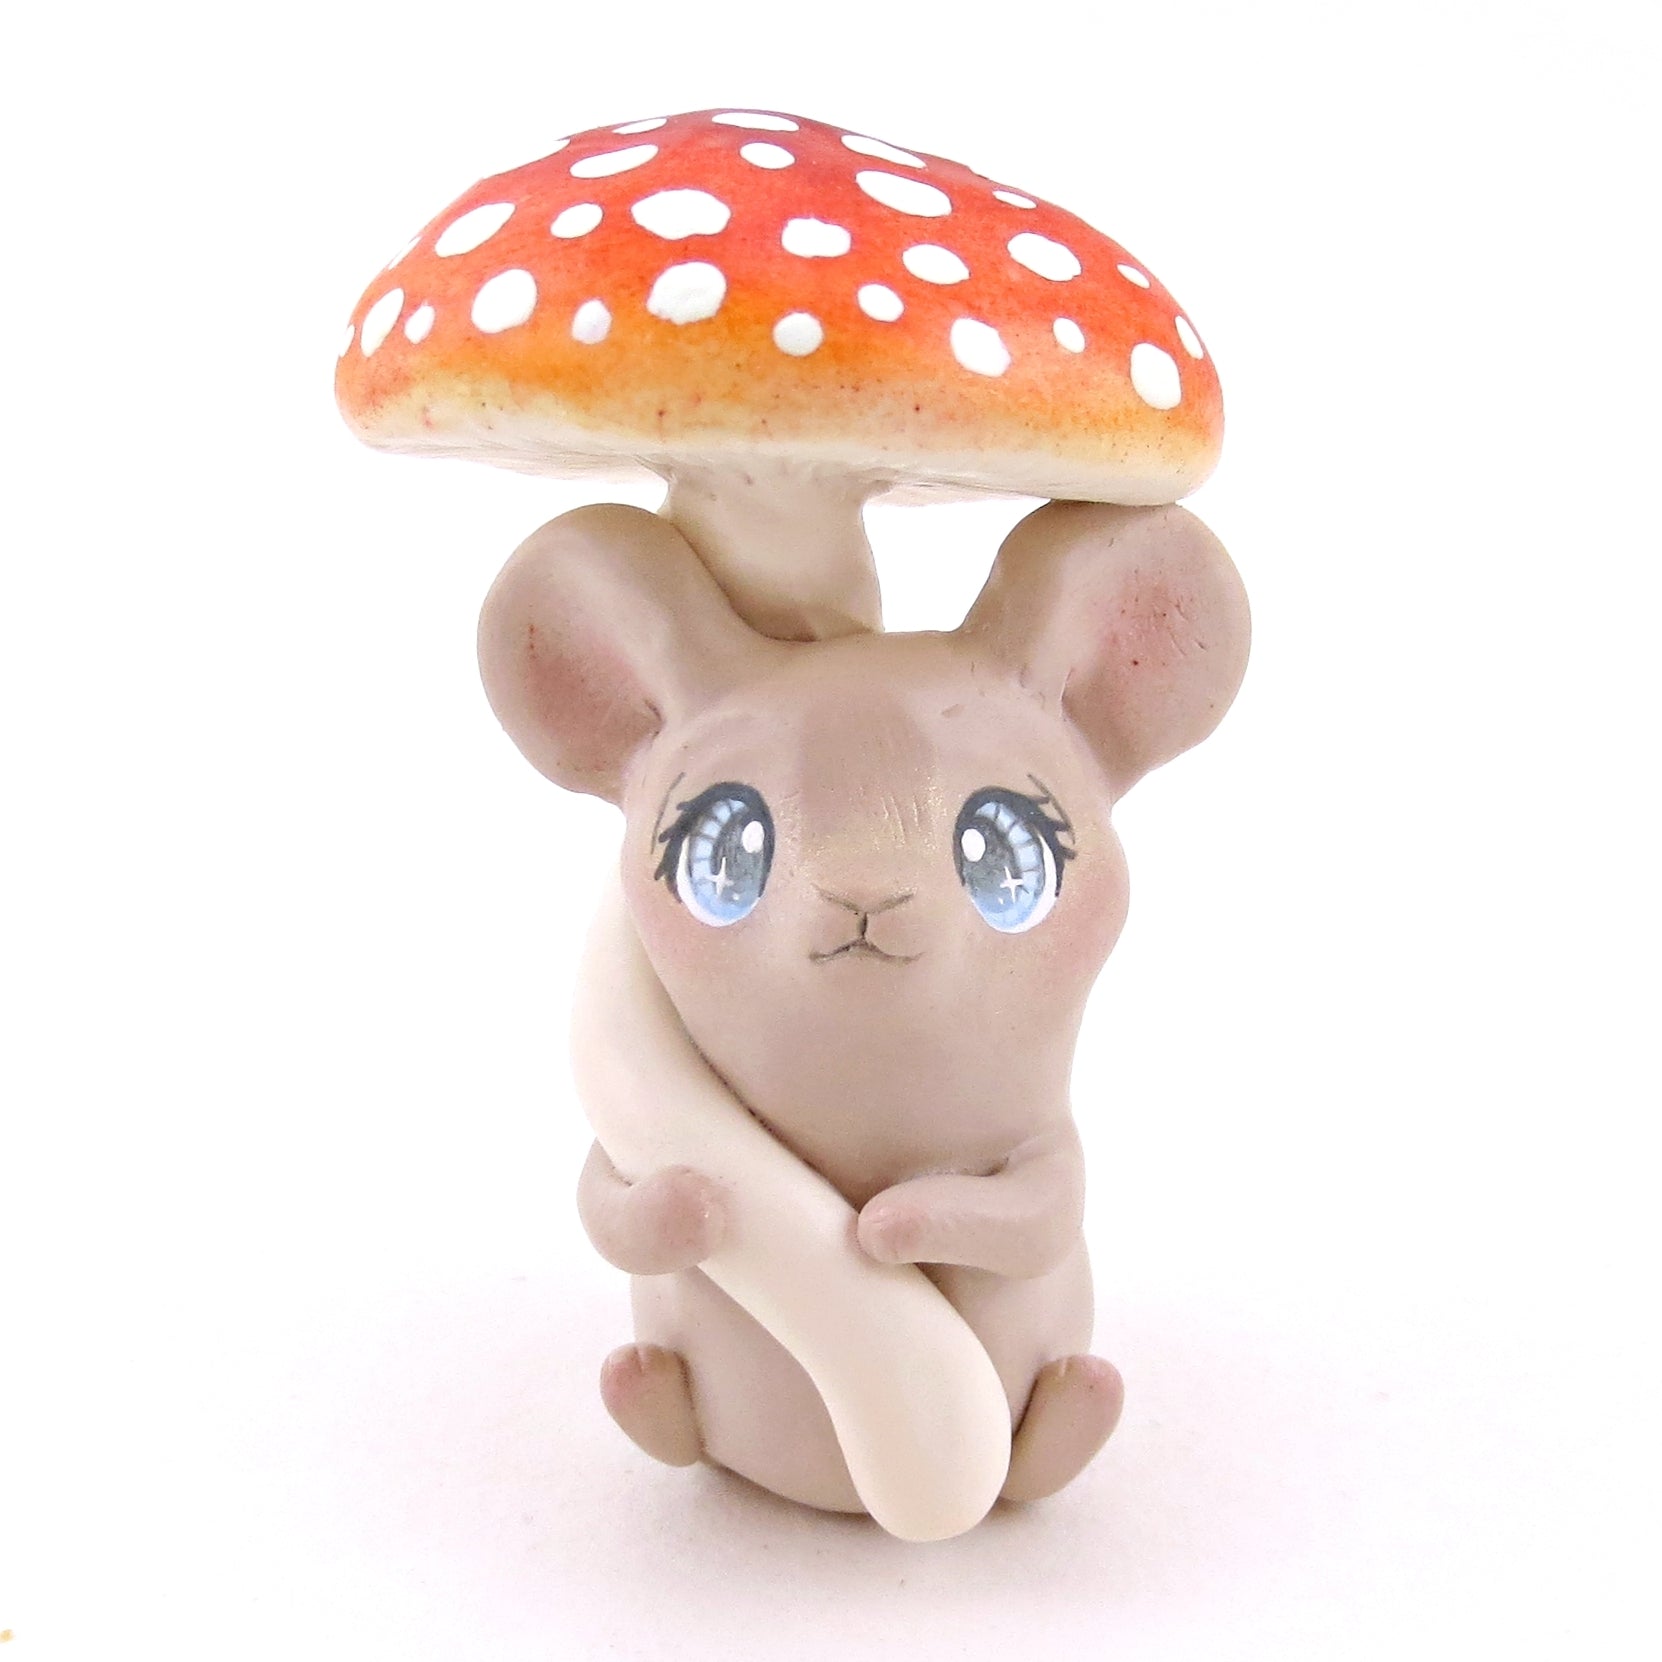 Mushroom Umbrella Mouse Figurine - Polymer Clay Animals Fall and Halloween Collection